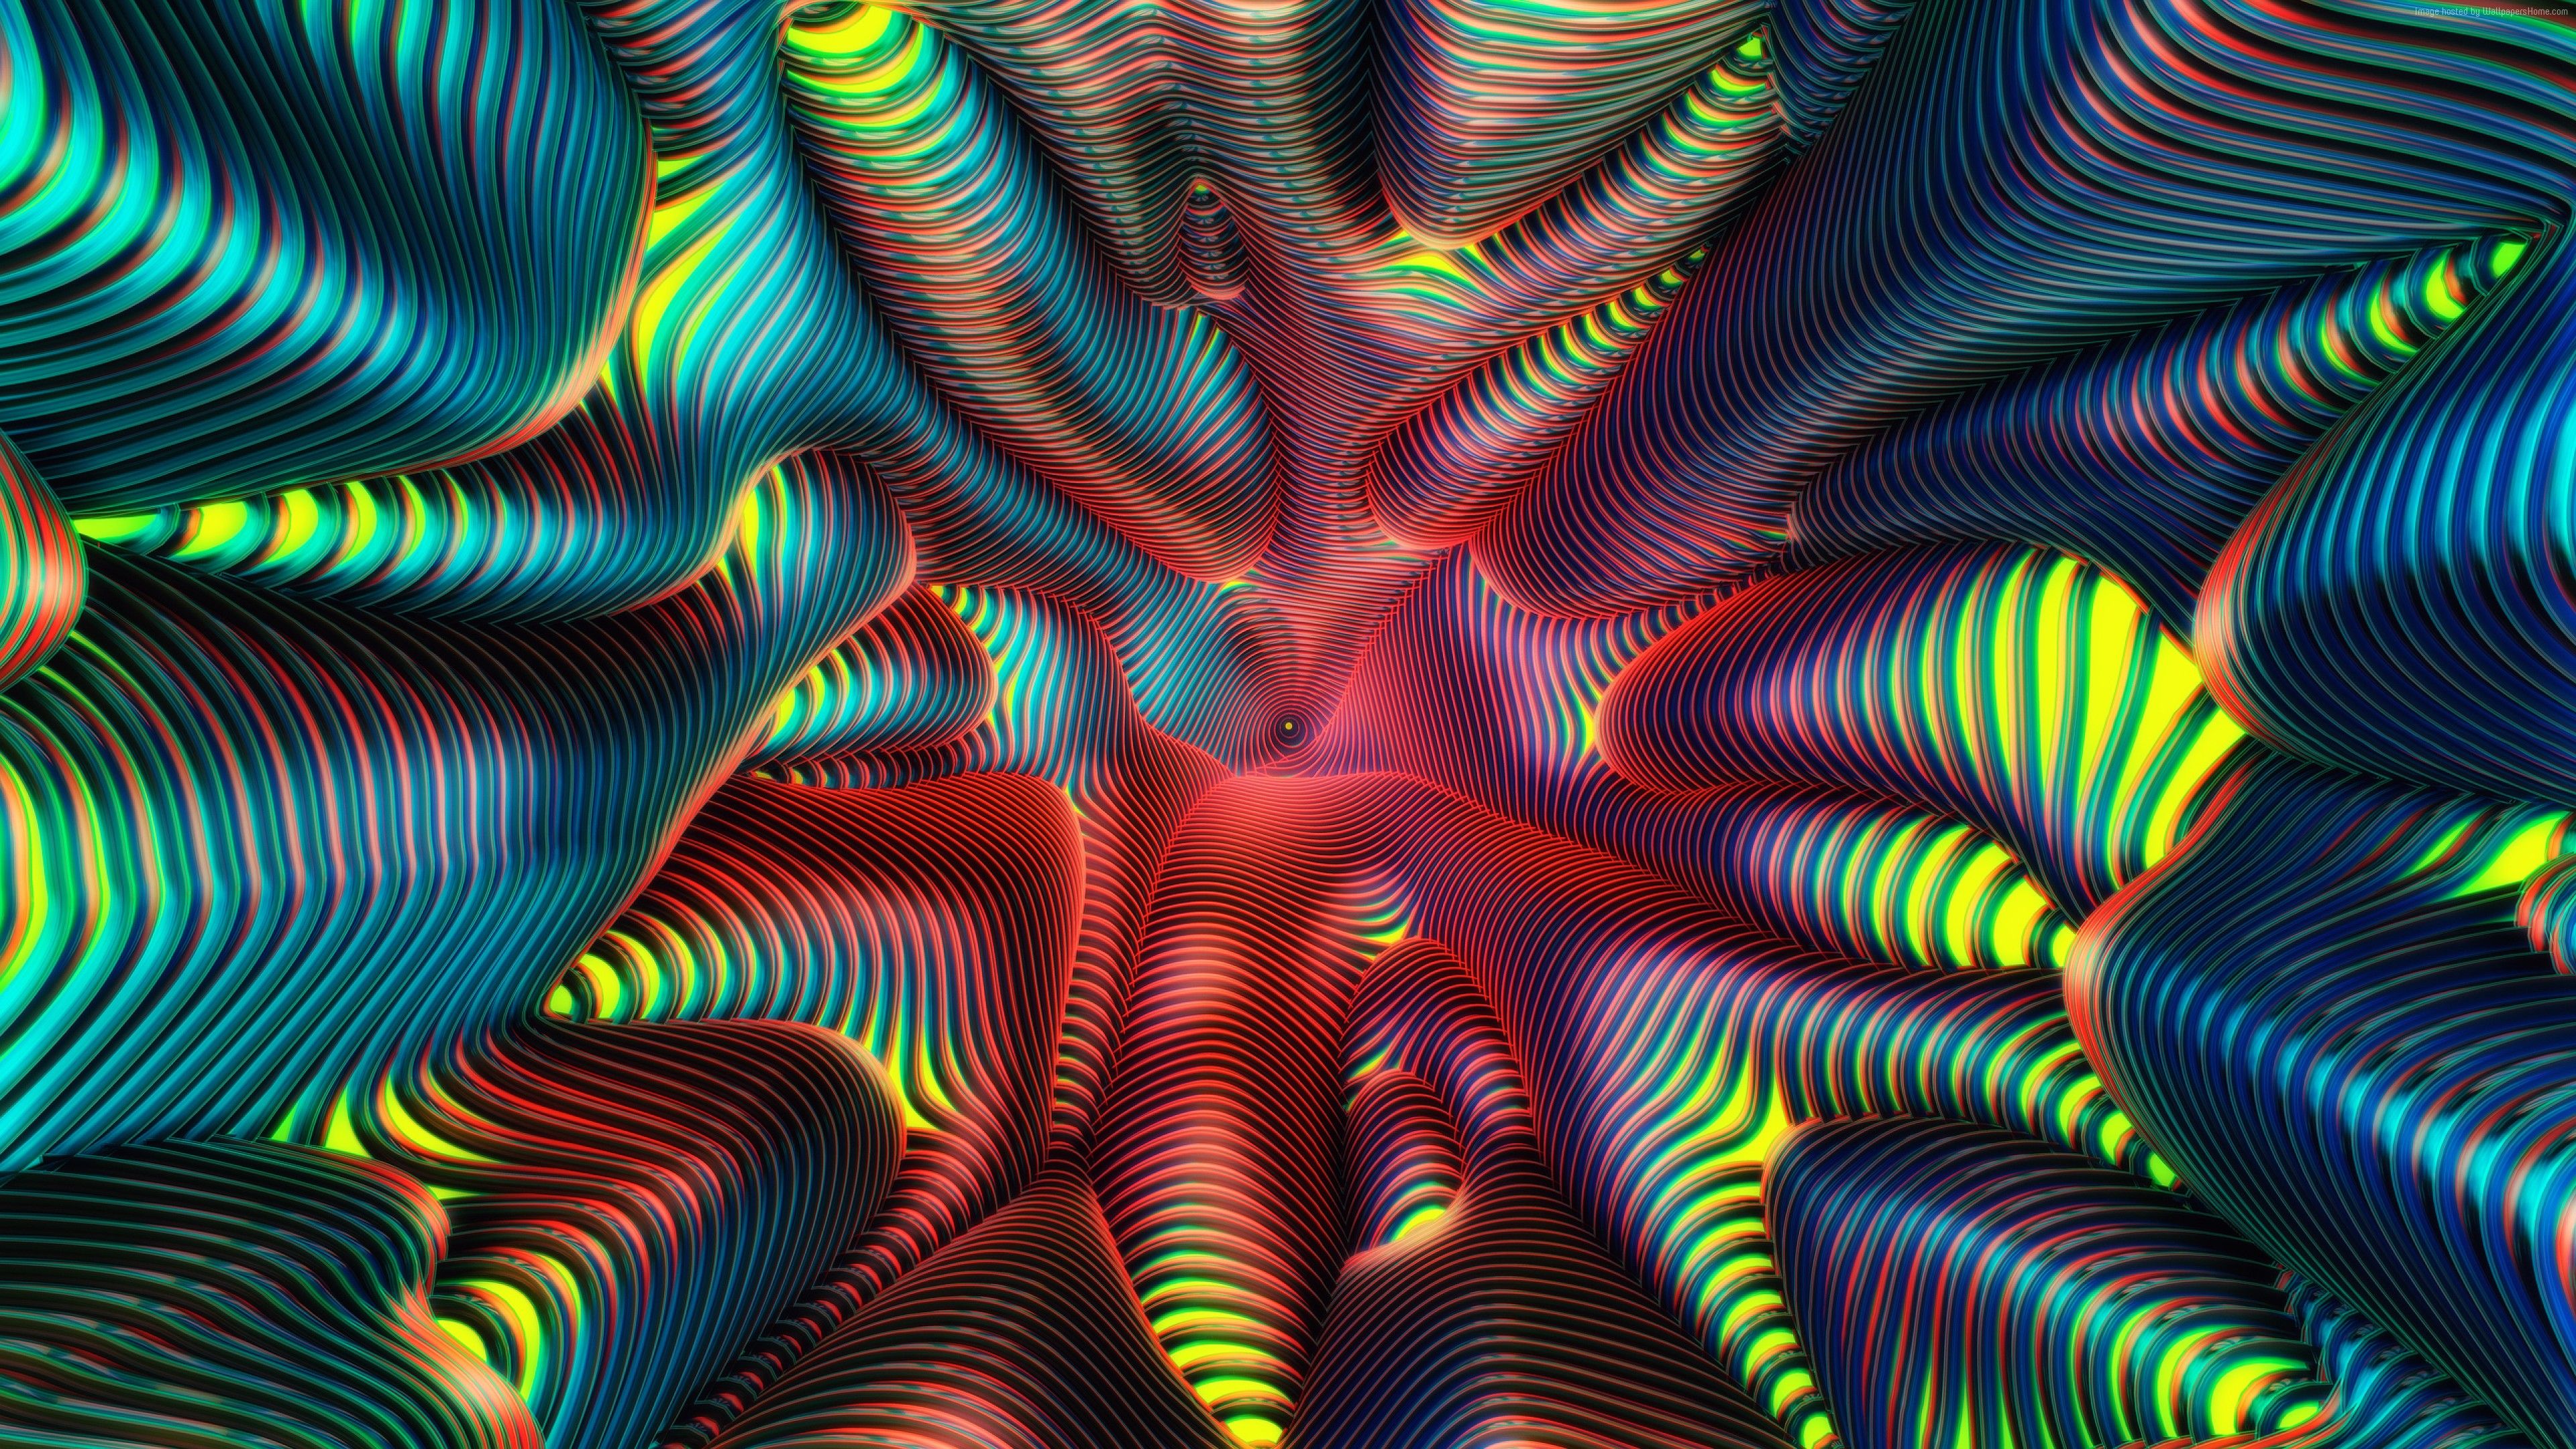 Wallpaper HD, abstract, Wormhole, spiral, Abstract Wallpaper